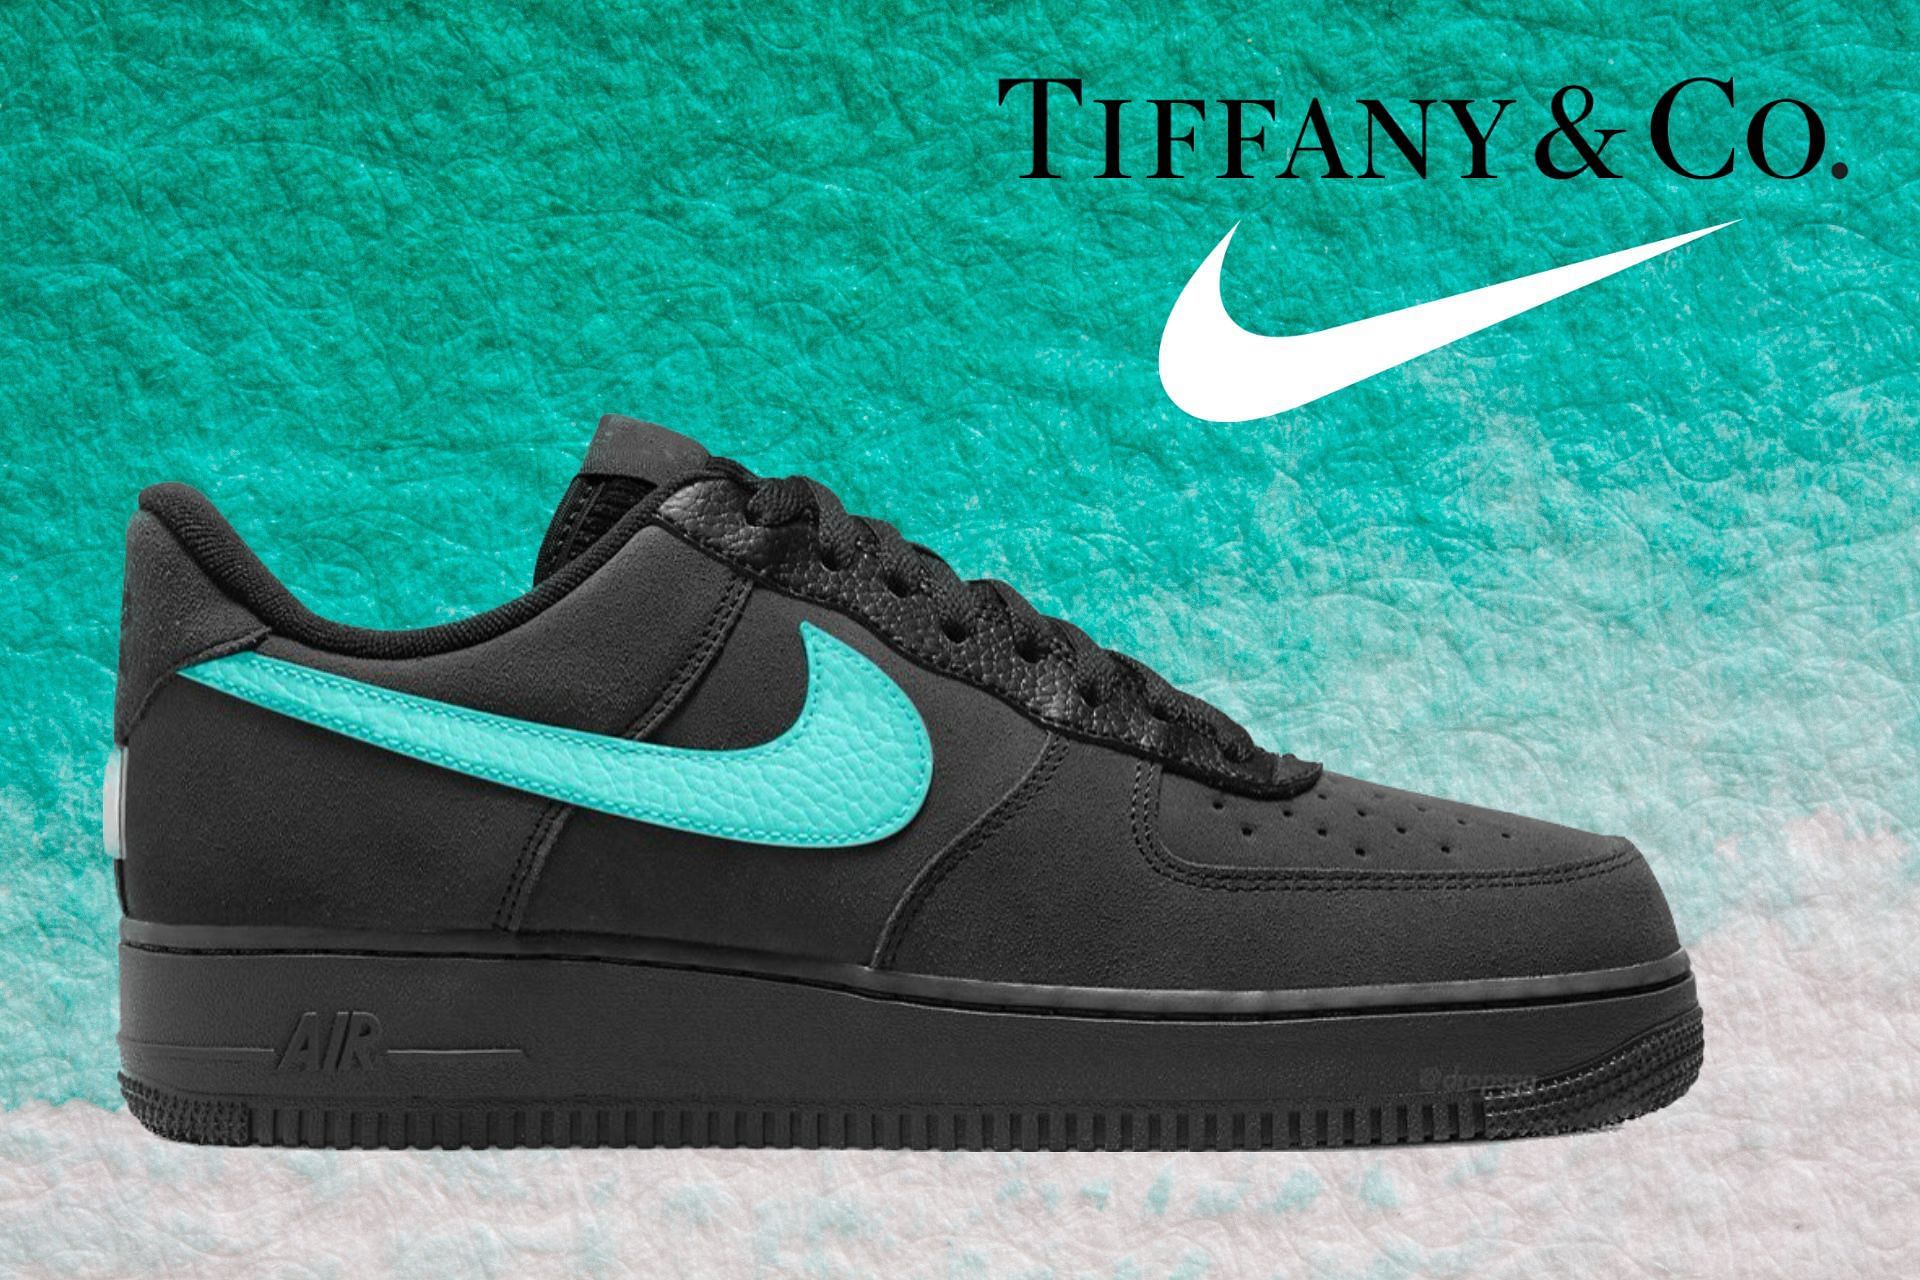 Tiffany & Co.: Tiffany & Co. x Nike Air Force 1 Low 1837 shoes